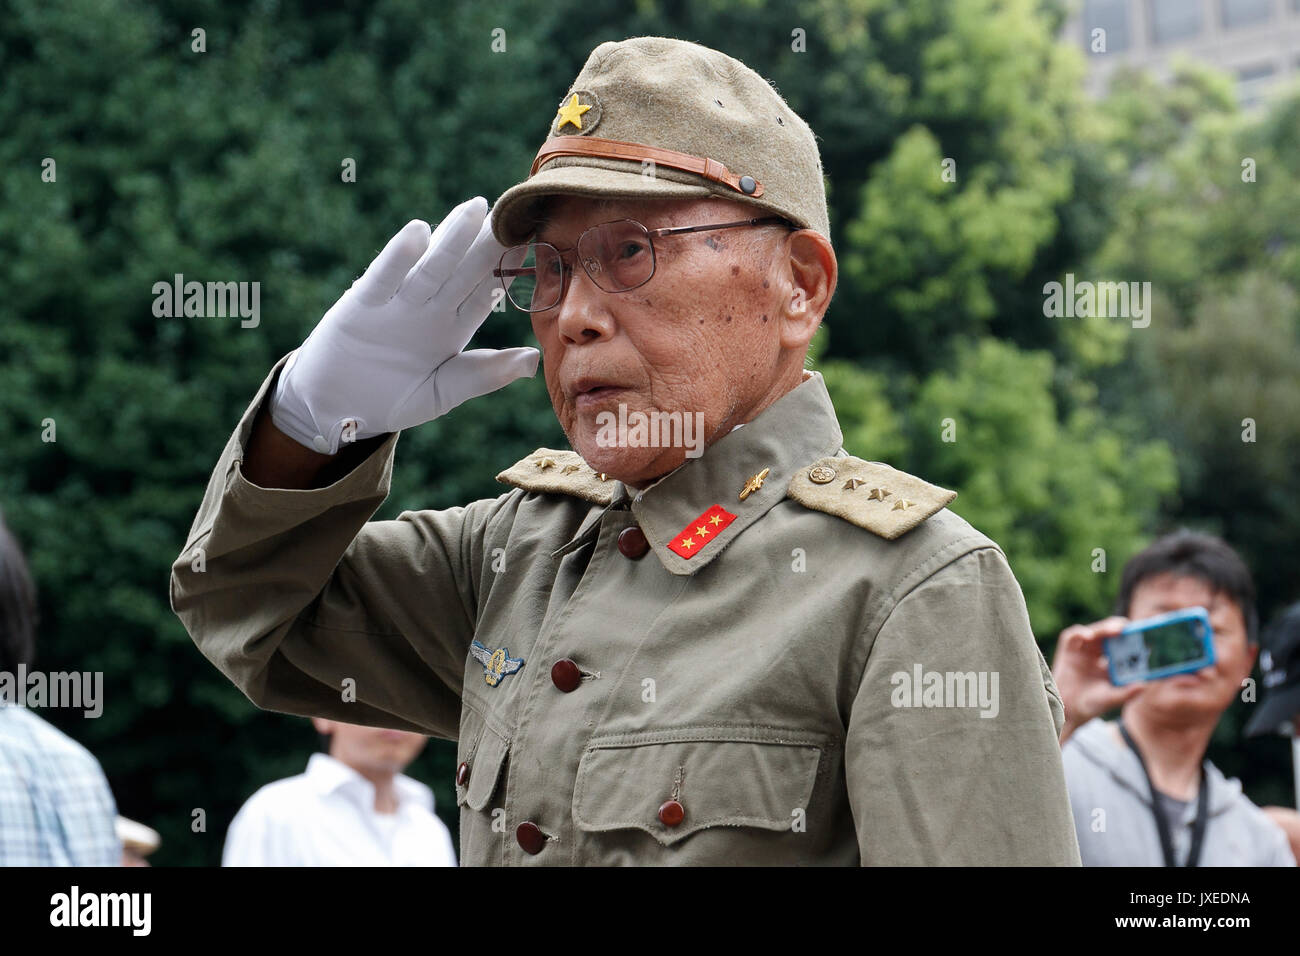 A man dressed as a Japanese imperial army soldier visits Yasukuni Shrine to pay his respects to the war dead on the 72nd anniversary of Japan's surrender in World War II on August 15, 2017, Tokyo, Japan. Prime Minister Shinzo Abe was not among the lawmakers to visit the Shrine and instead sent a ritual offering to avoid angering neighboring countries who also associate Yasukuni with war criminals and Japan's imperial past. Credit: Rodrigo Reyes Marin/AFLO/Alamy Live News Stock Photo